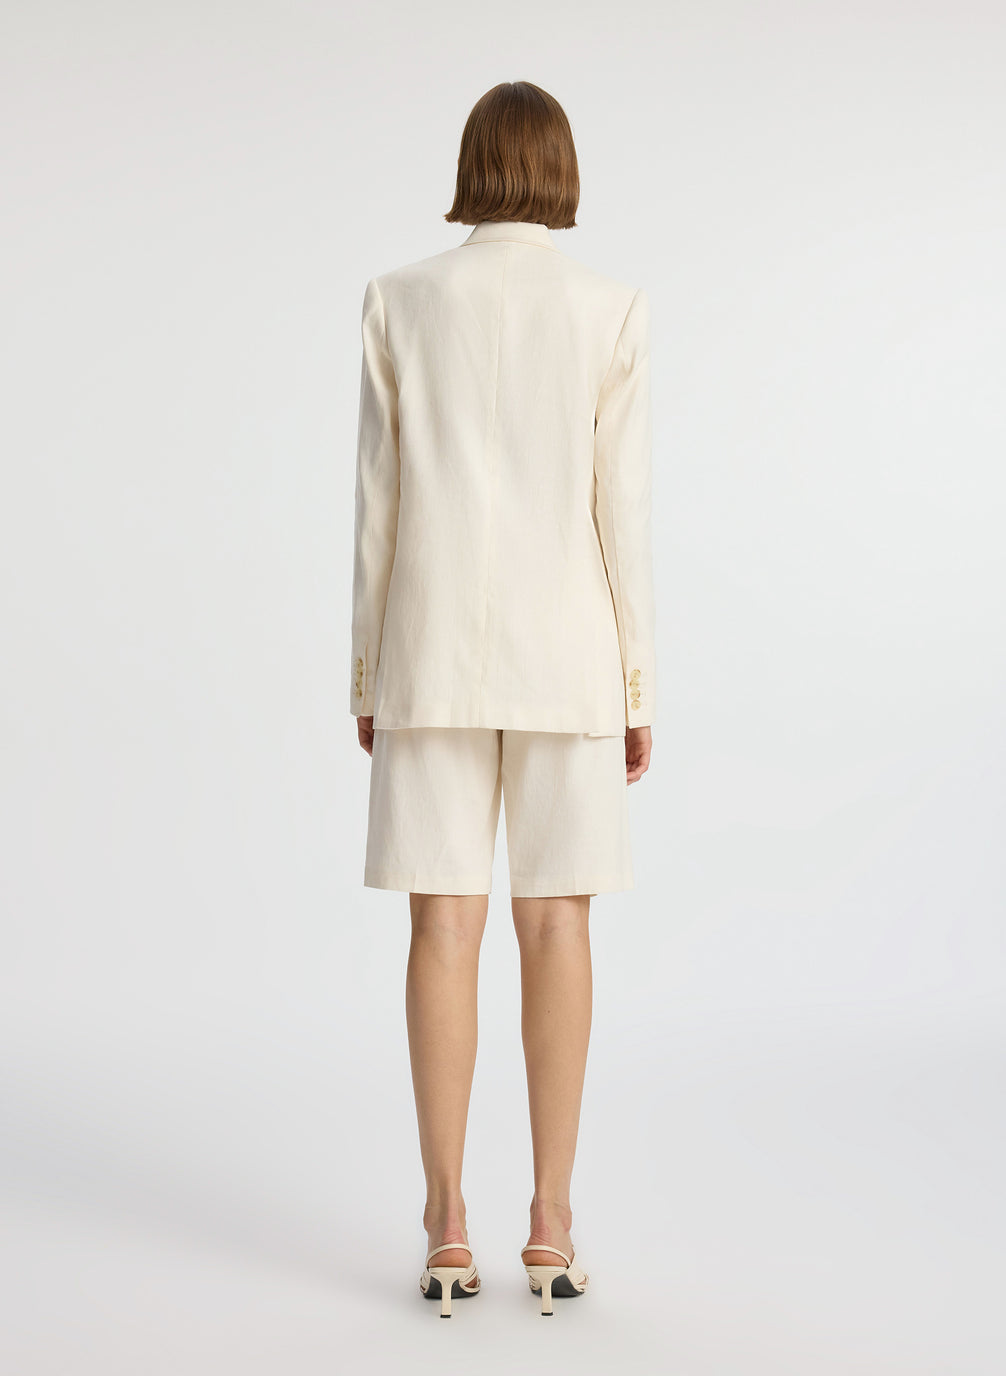 back view of woman wearing cream shorts suit